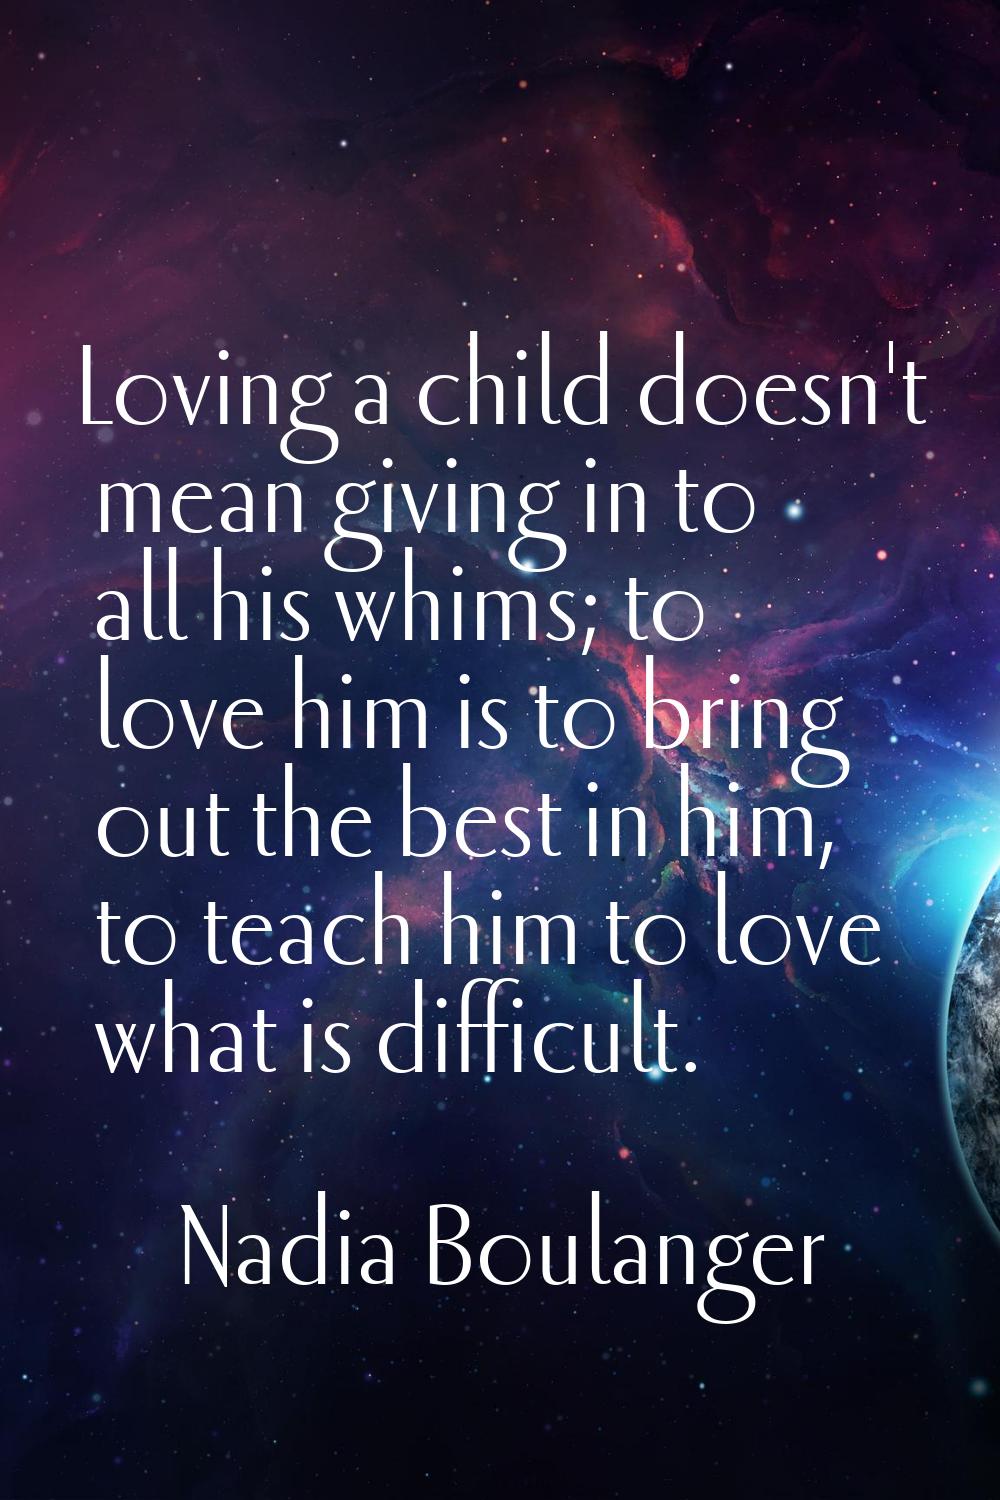 Loving a child doesn't mean giving in to all his whims; to love him is to bring out the best in him